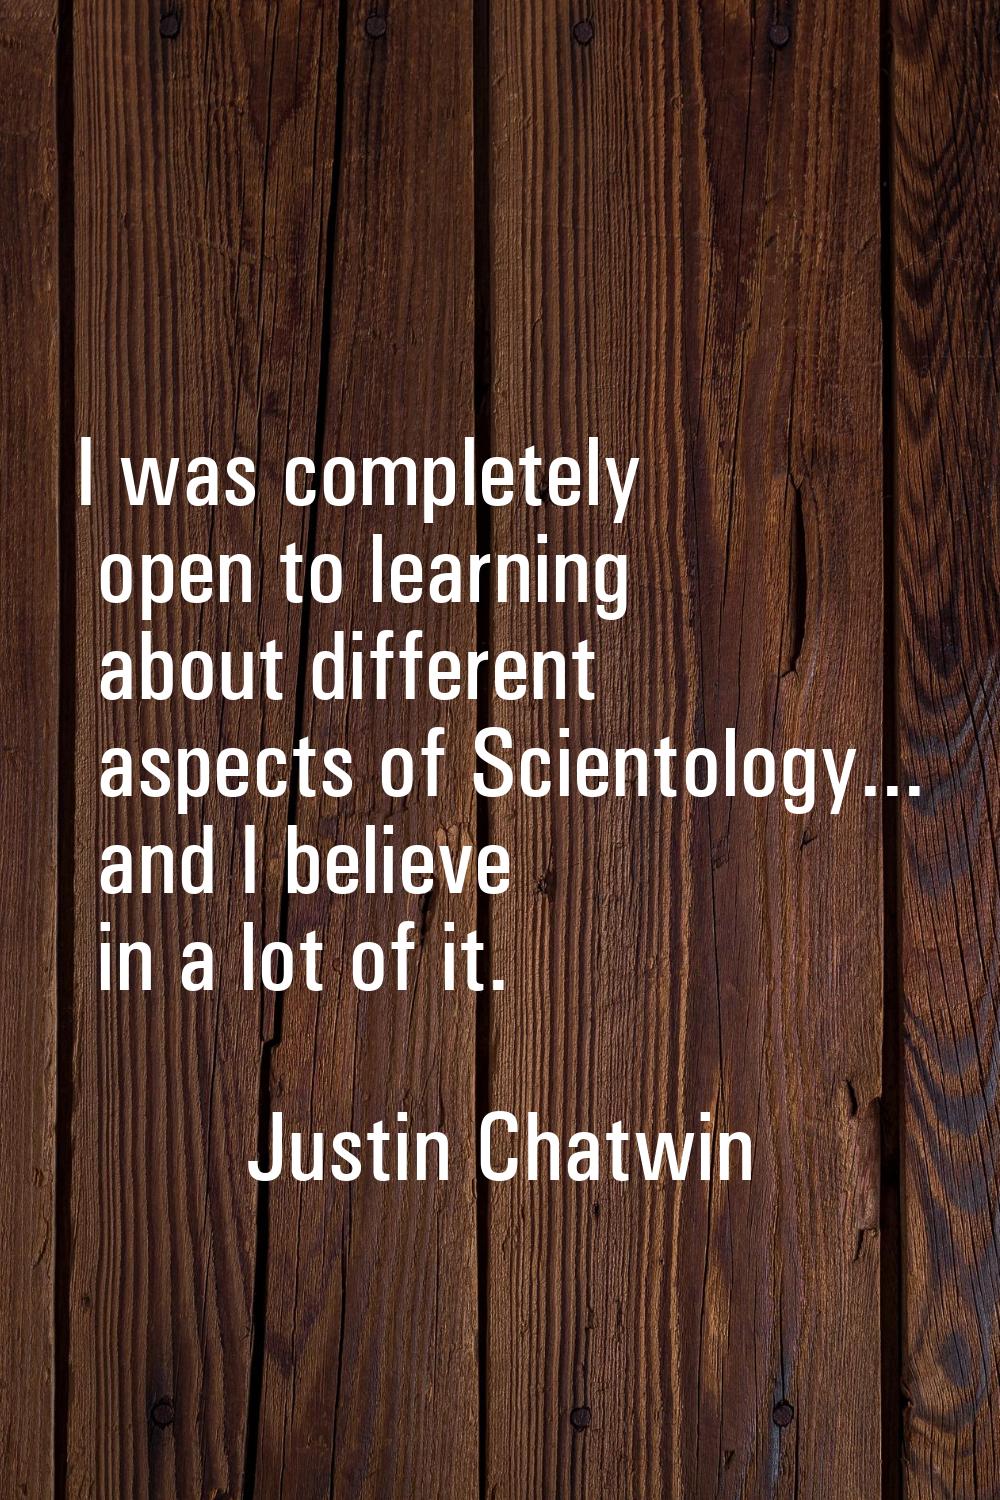 I was completely open to learning about different aspects of Scientology... and I believe in a lot 